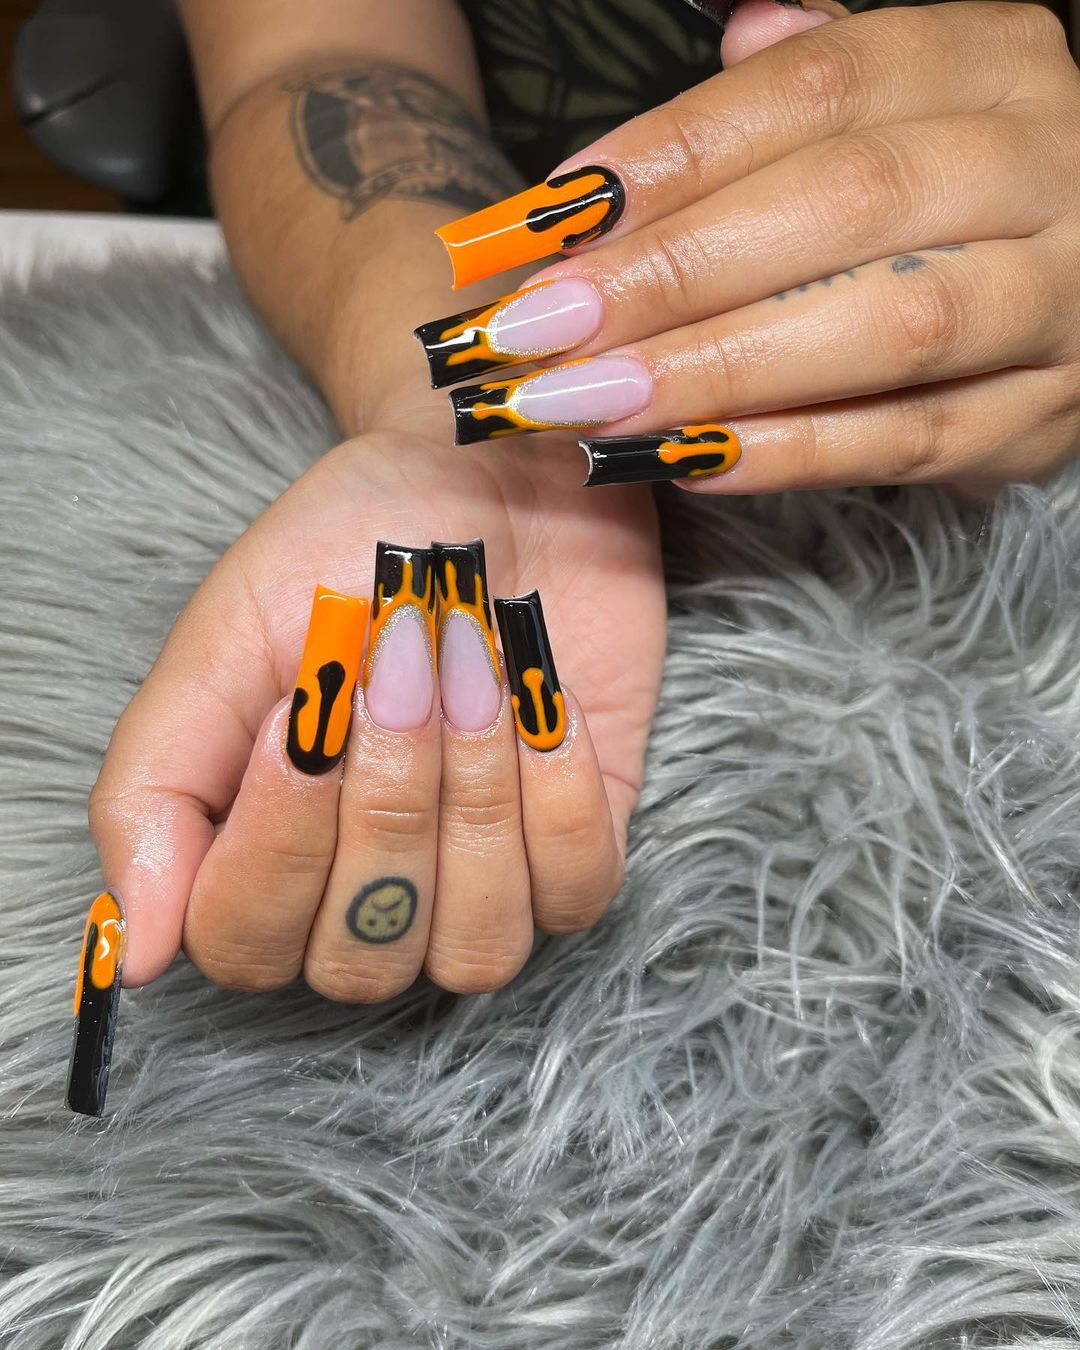 If you're looking for something a little different, you could try a color with contrast like orange and black. That would be really striking. The black and orange drips on French tips are amazing!